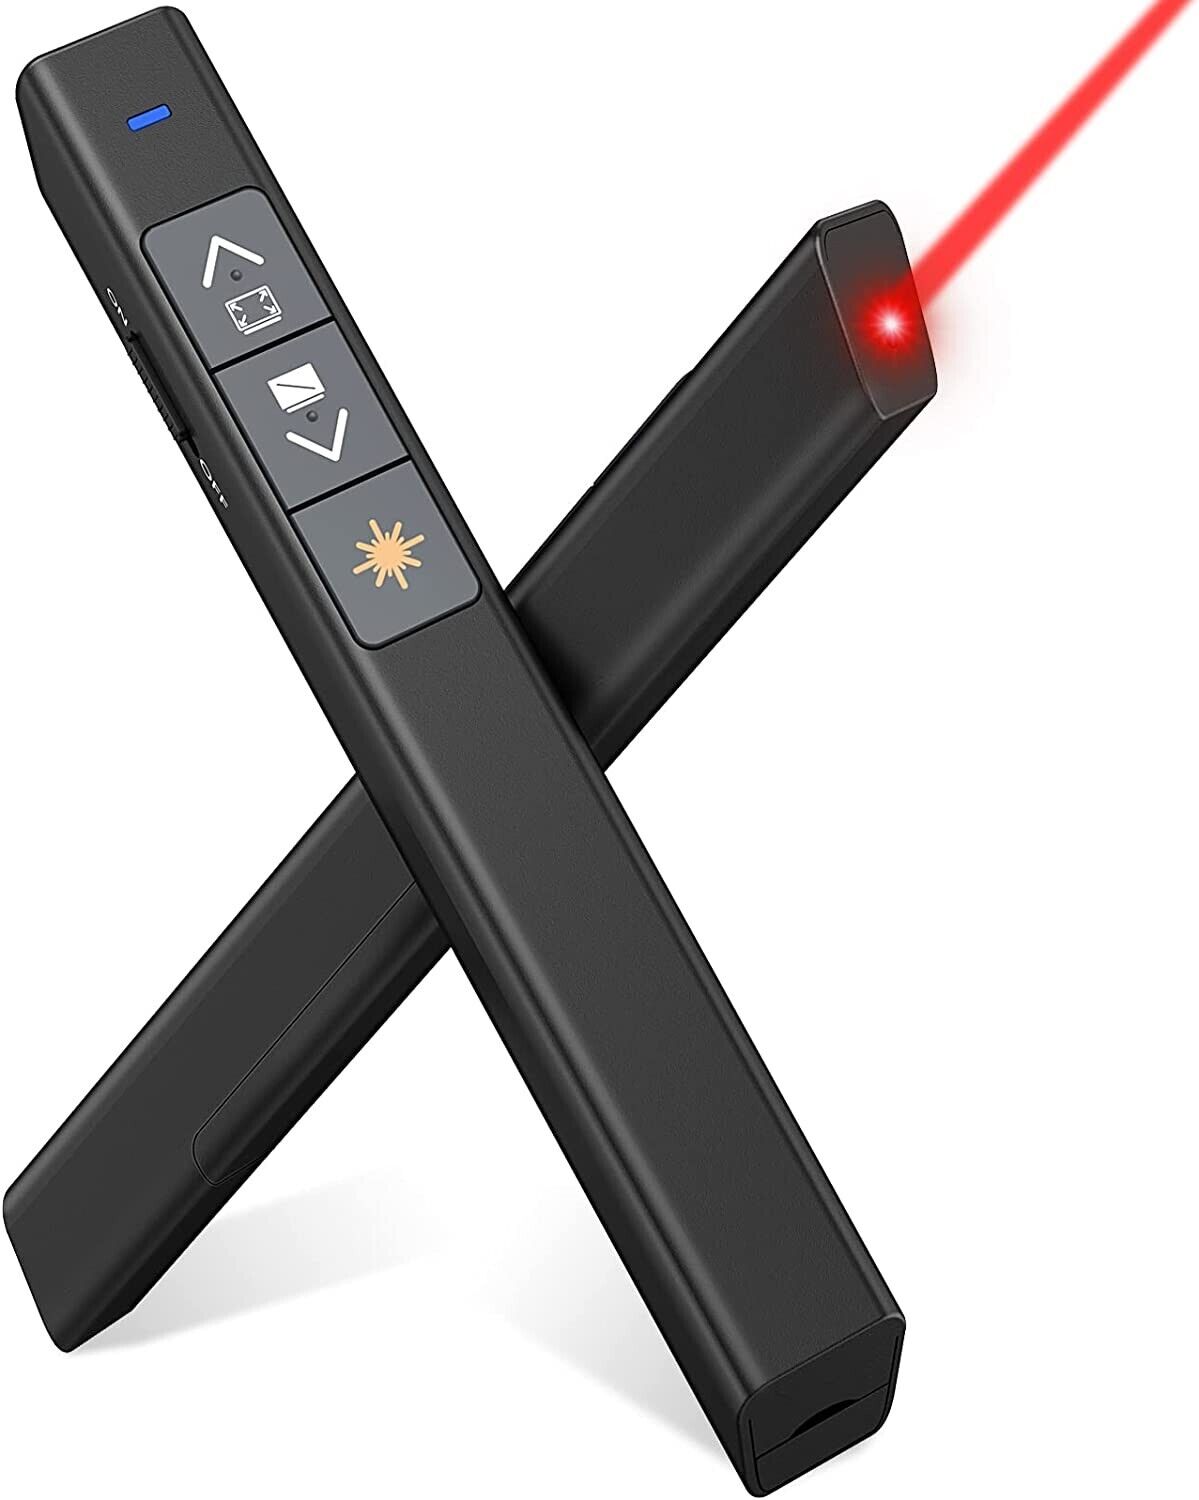 Presentation Clicker with Laser Pointer for Presentations, 2.4GHz Powerpoint Cli